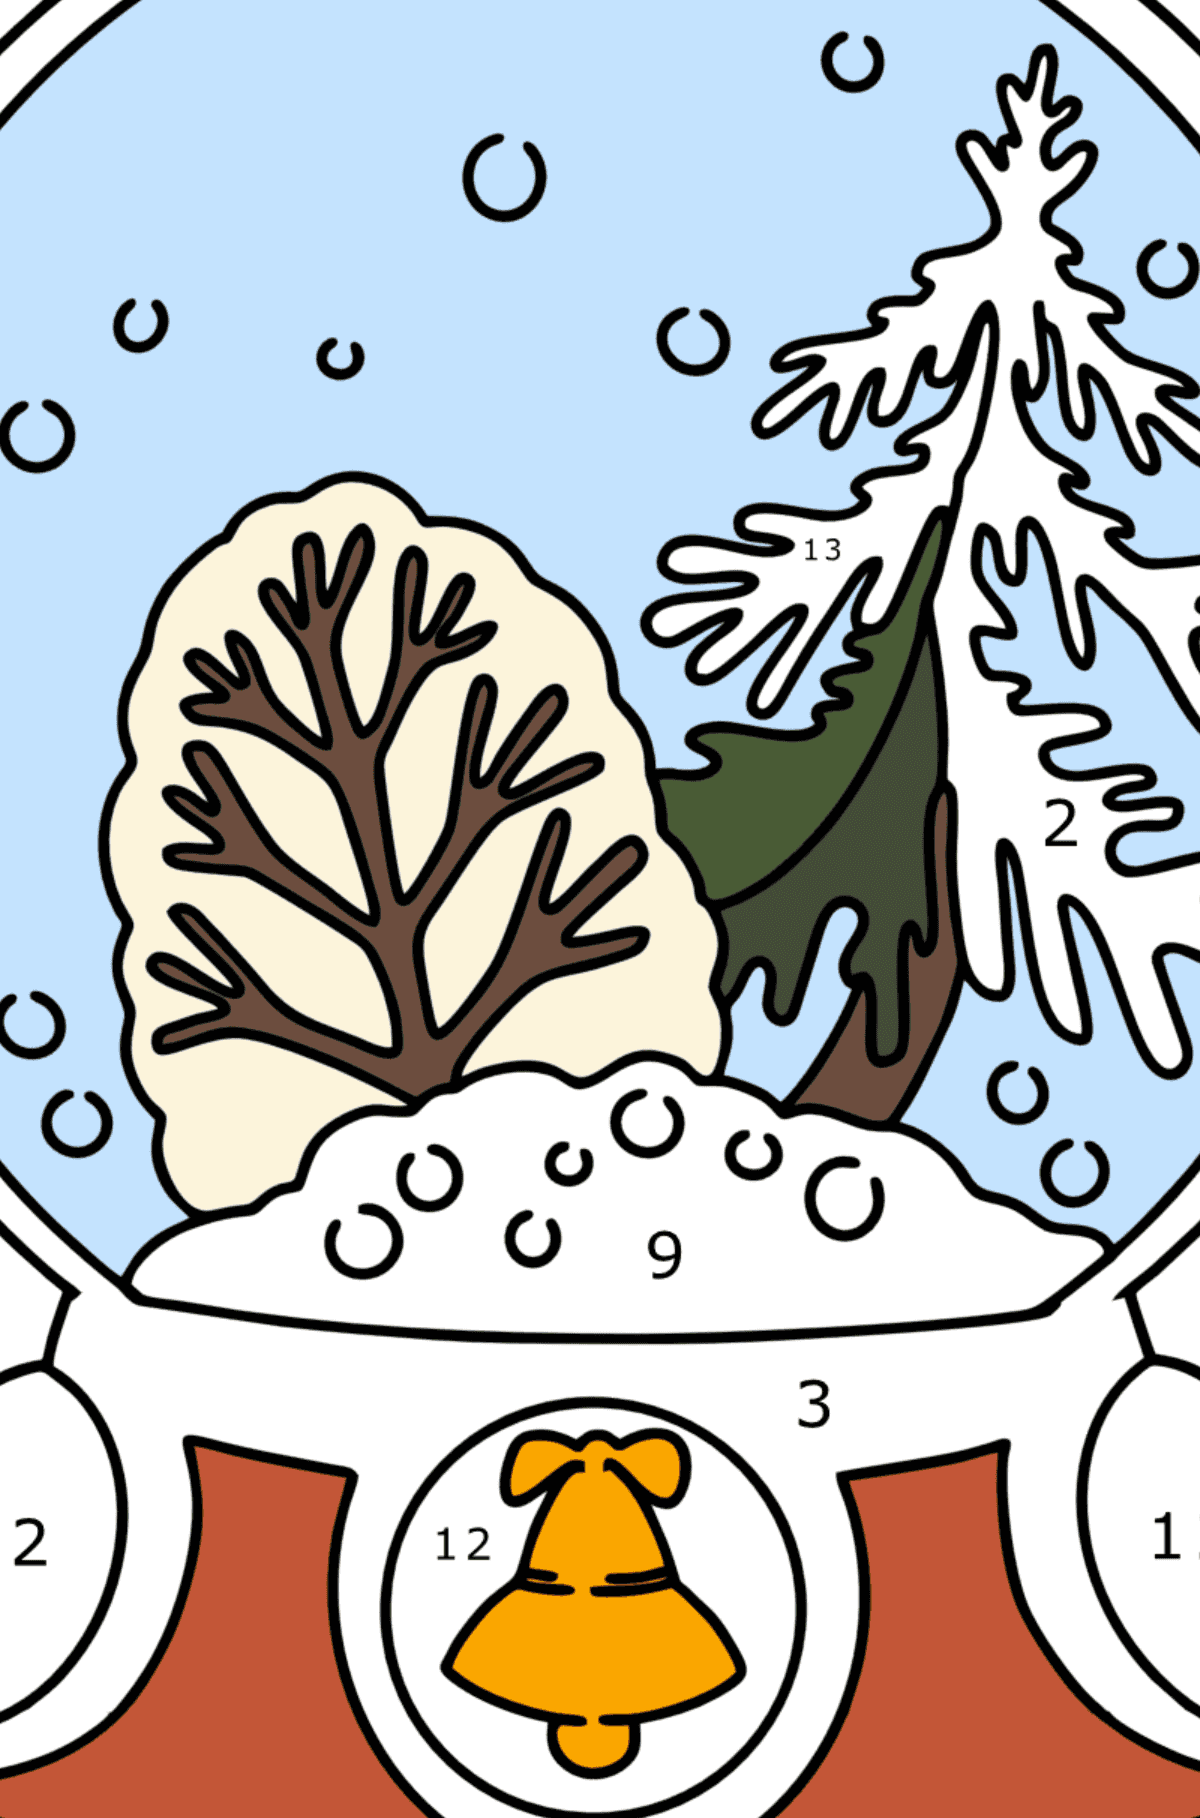 Snow Globe coloring page - Coloring by Numbers for Kids